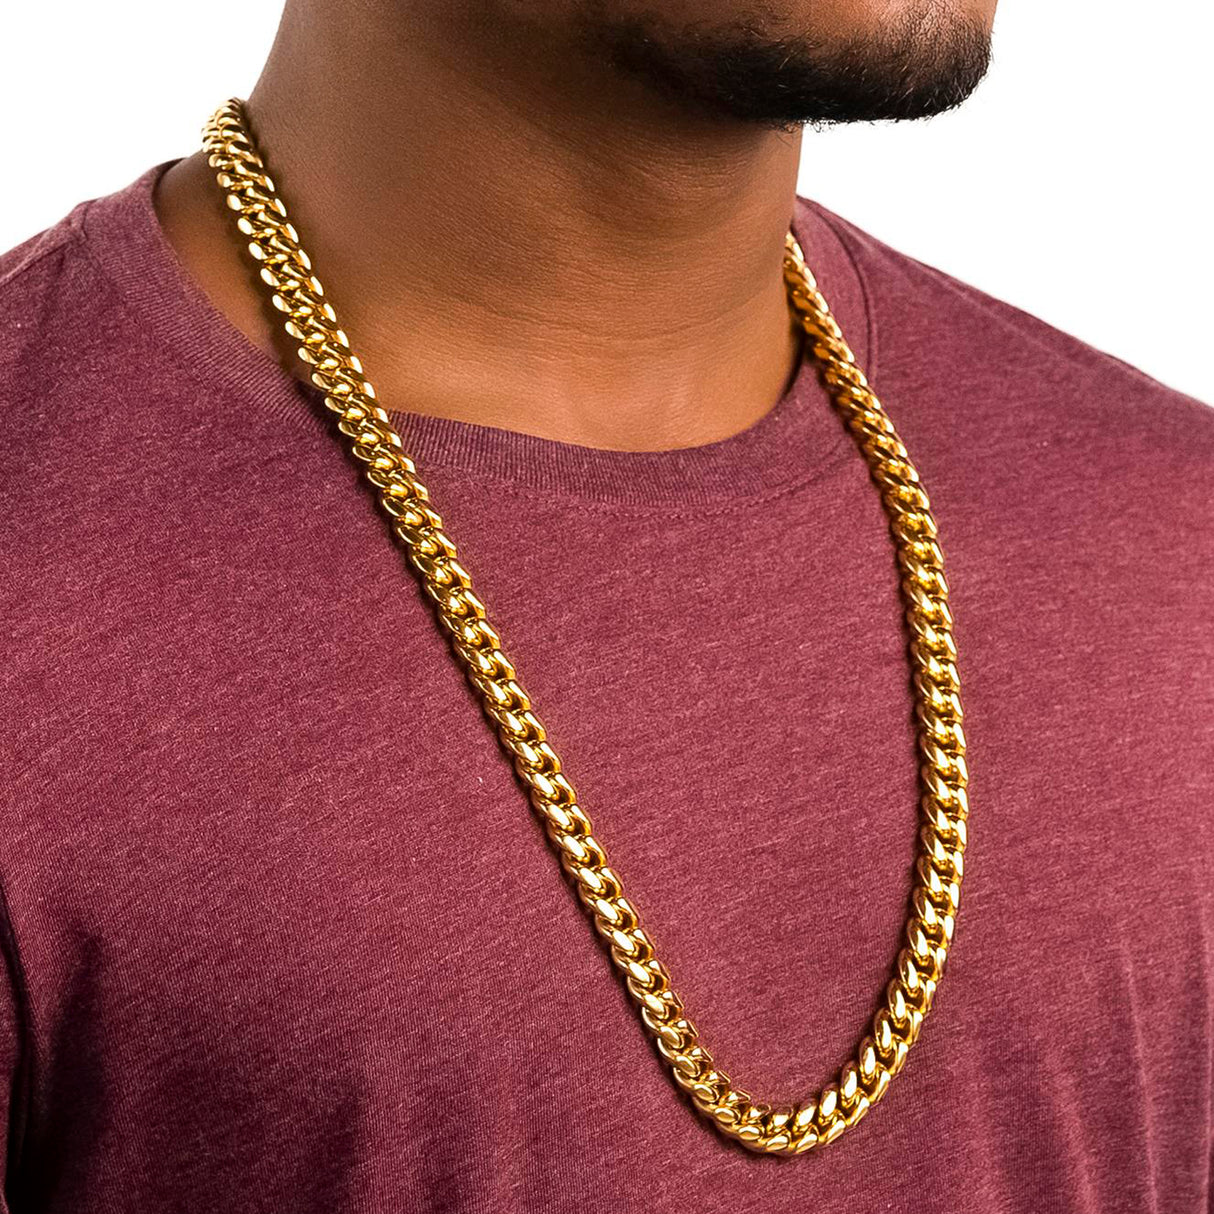 the-gold-gods-mens-jewelry-18k-gold-plated-miami-cuban-link-necklace-12mm-30inch